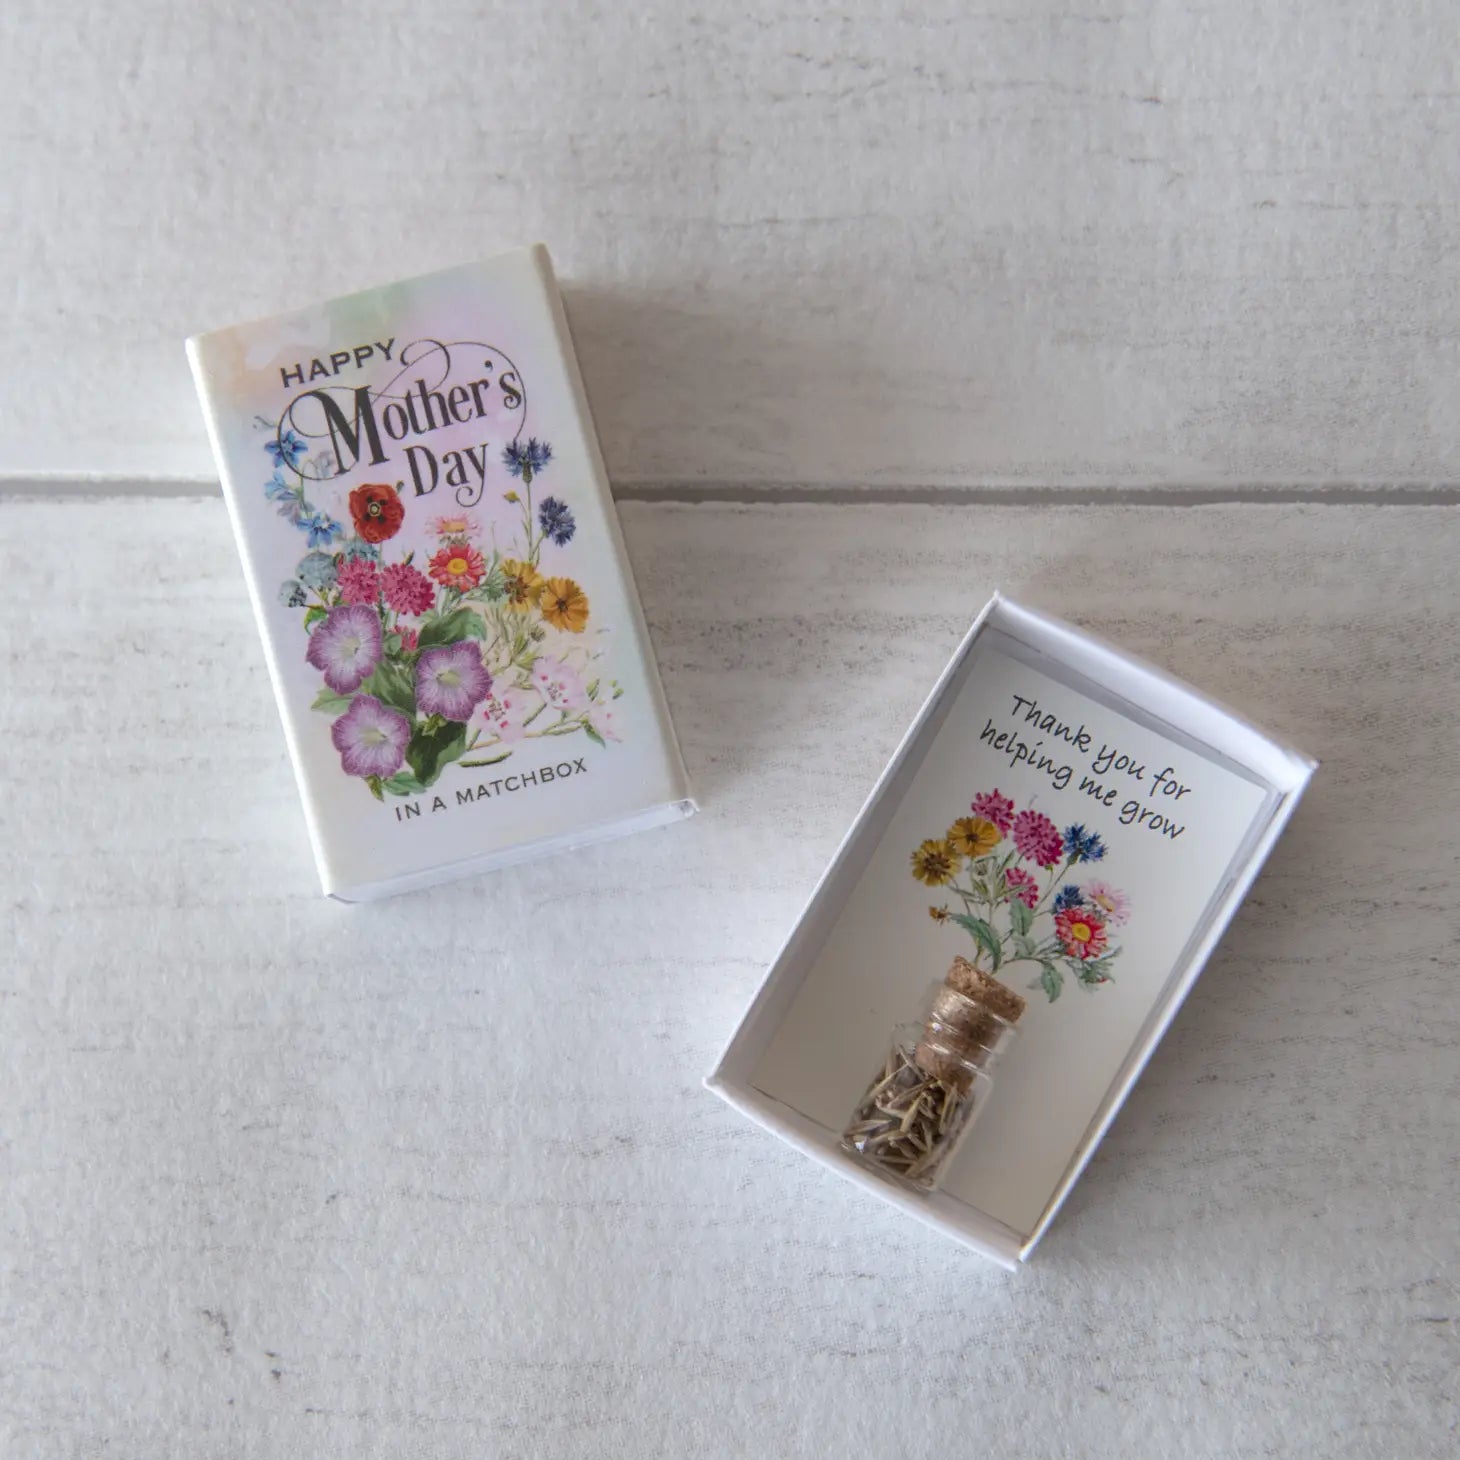 "Mother's Day" Wild Flower Seeds In A Matchbox